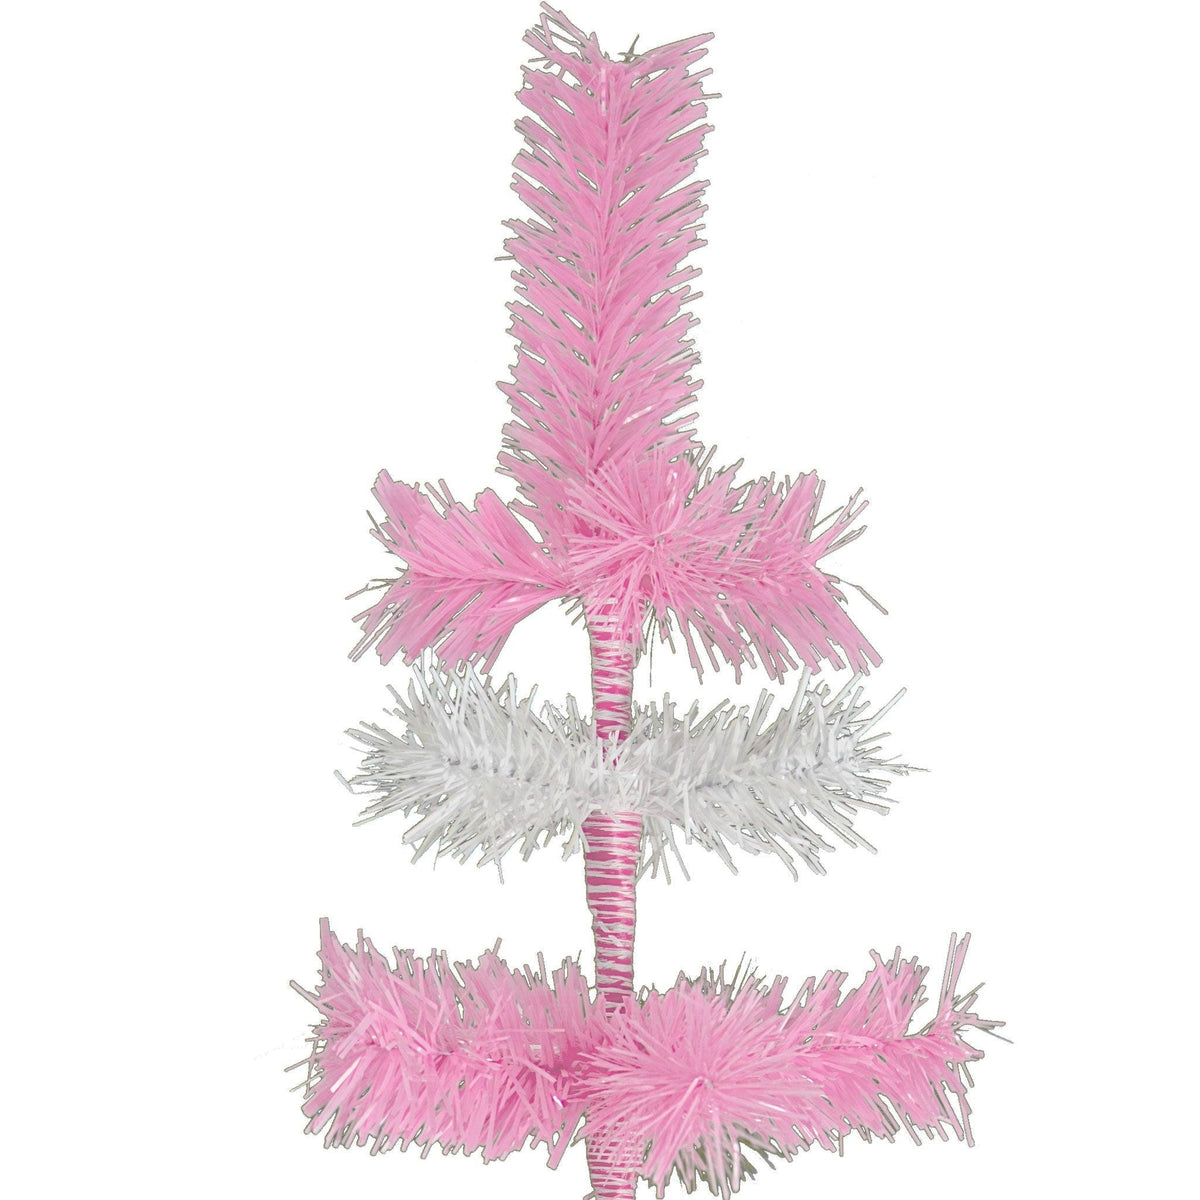 Pink & White Layered Tinsel Christmas Trees!    Decorate for the holidays with a Shiny Pink and Matte White retro-style Christmas Tree.  Incorporate a little purple and white into your holiday decorations this year. On sale at leedisplay.com